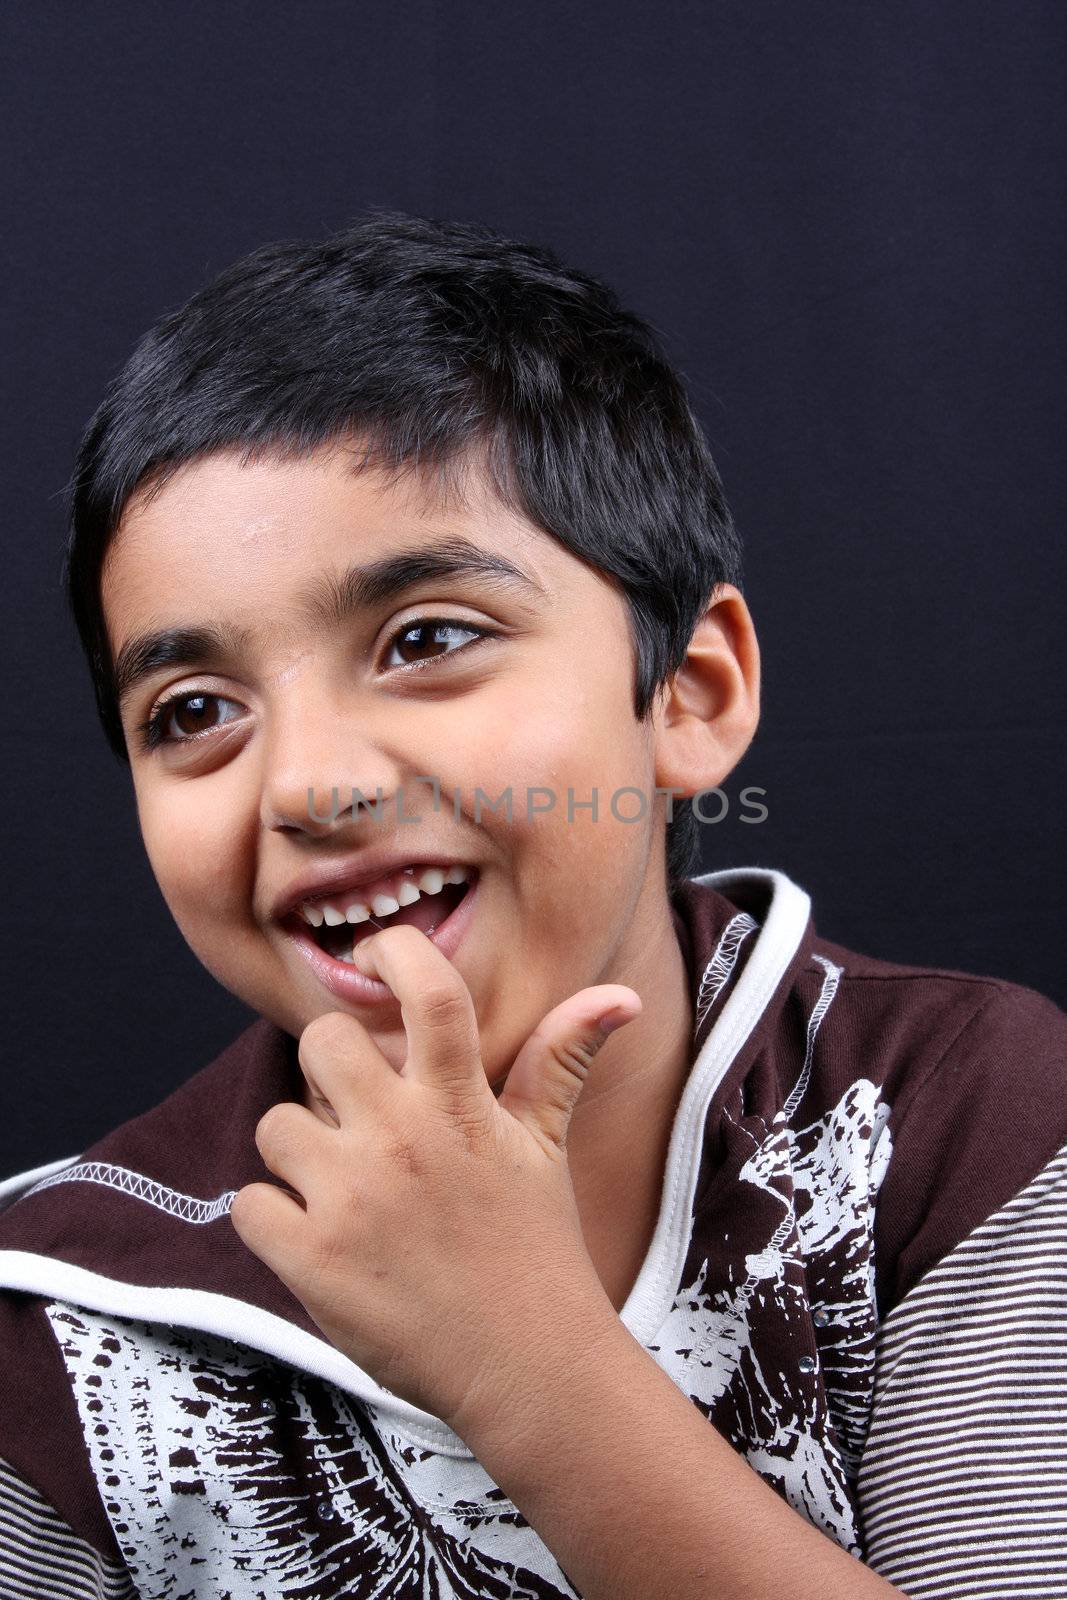 A portrait of a cute Indian boy biting his finger.